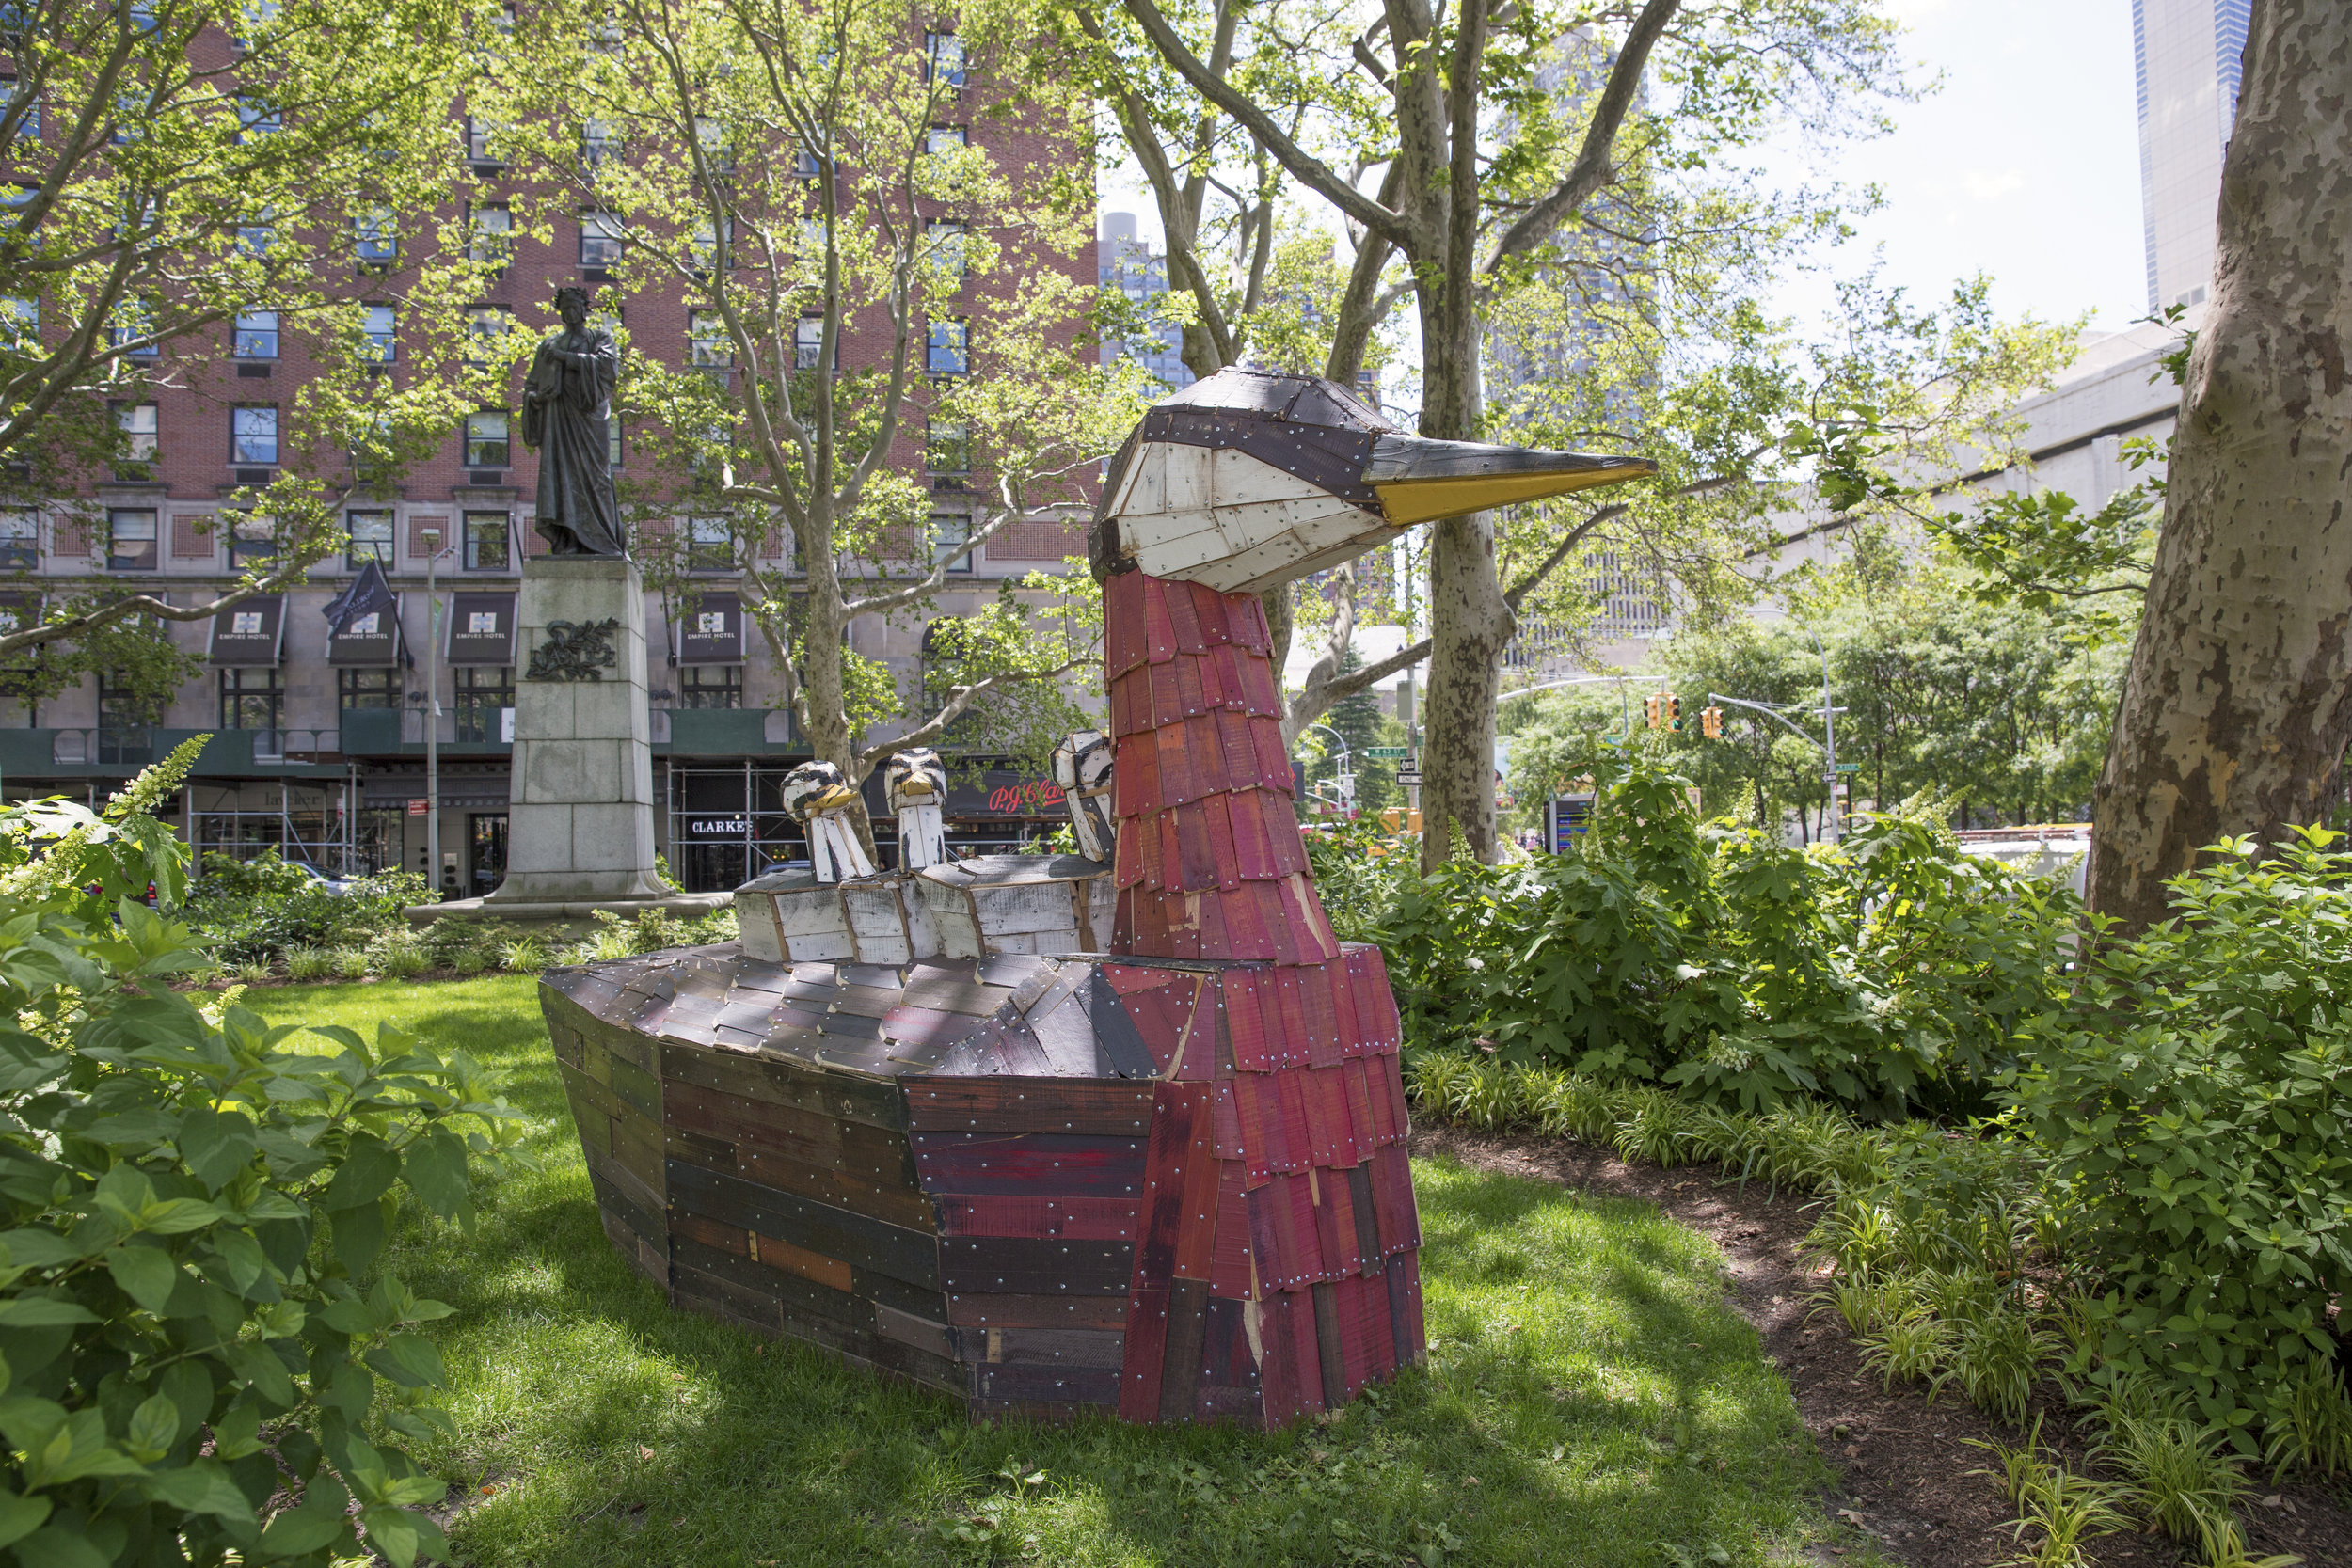   Red-Necked Grebe  at 64th Street, 9 x 6 x 14.5 feet, reclaimed wood, hardware, paint, 2018-19 